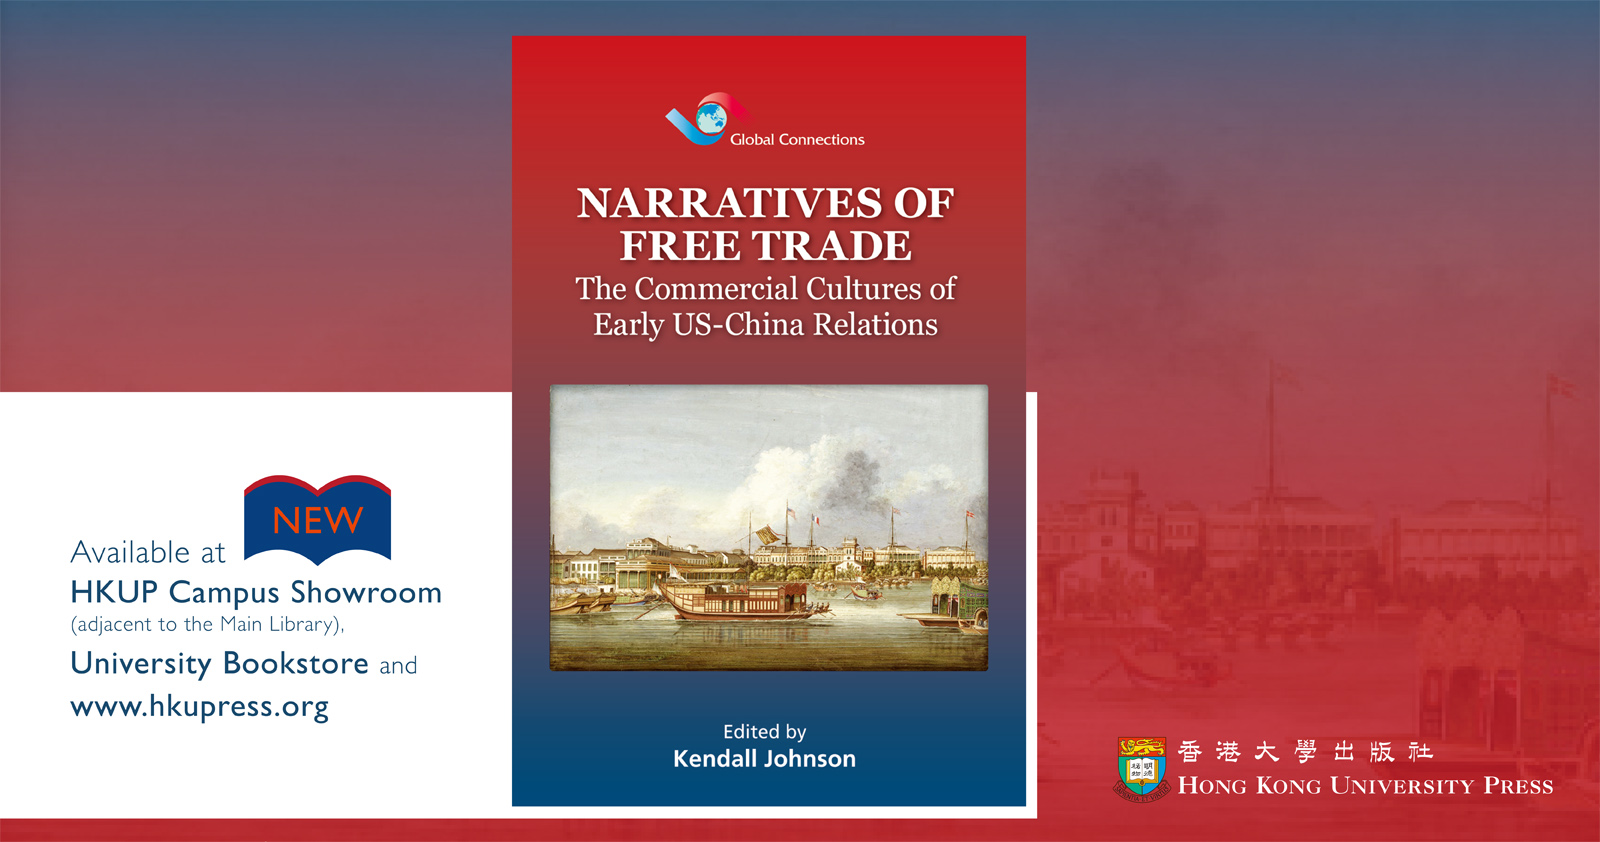 NEW from HKUP - Narratives of Free Trade